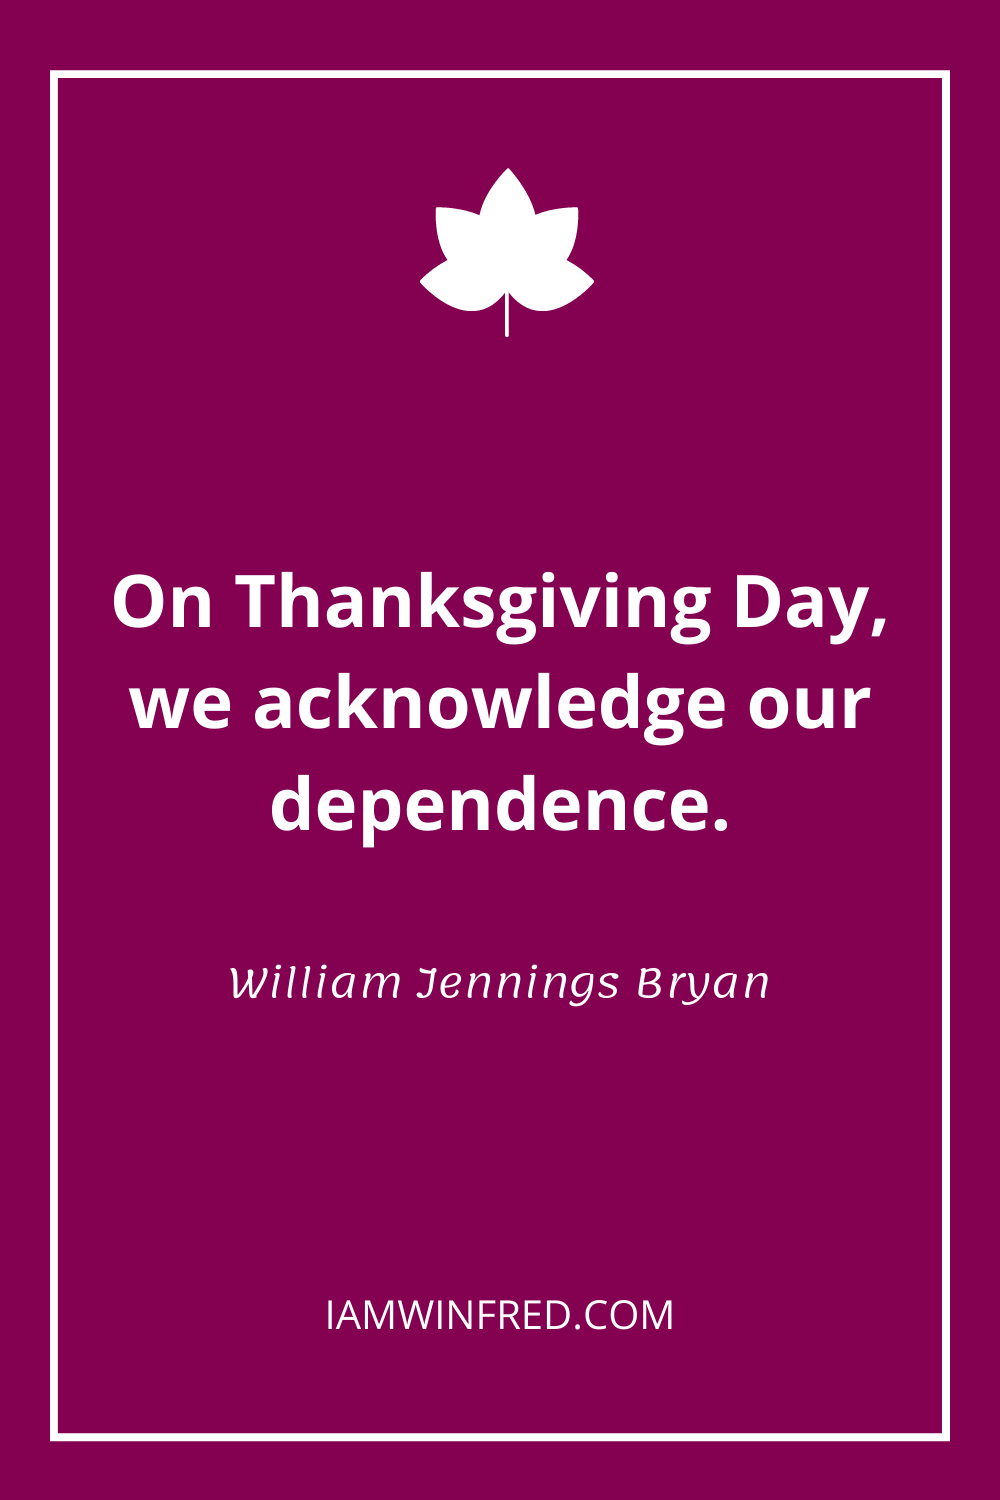 On Thanksgiving Day We Acknowledge Our Dependence.